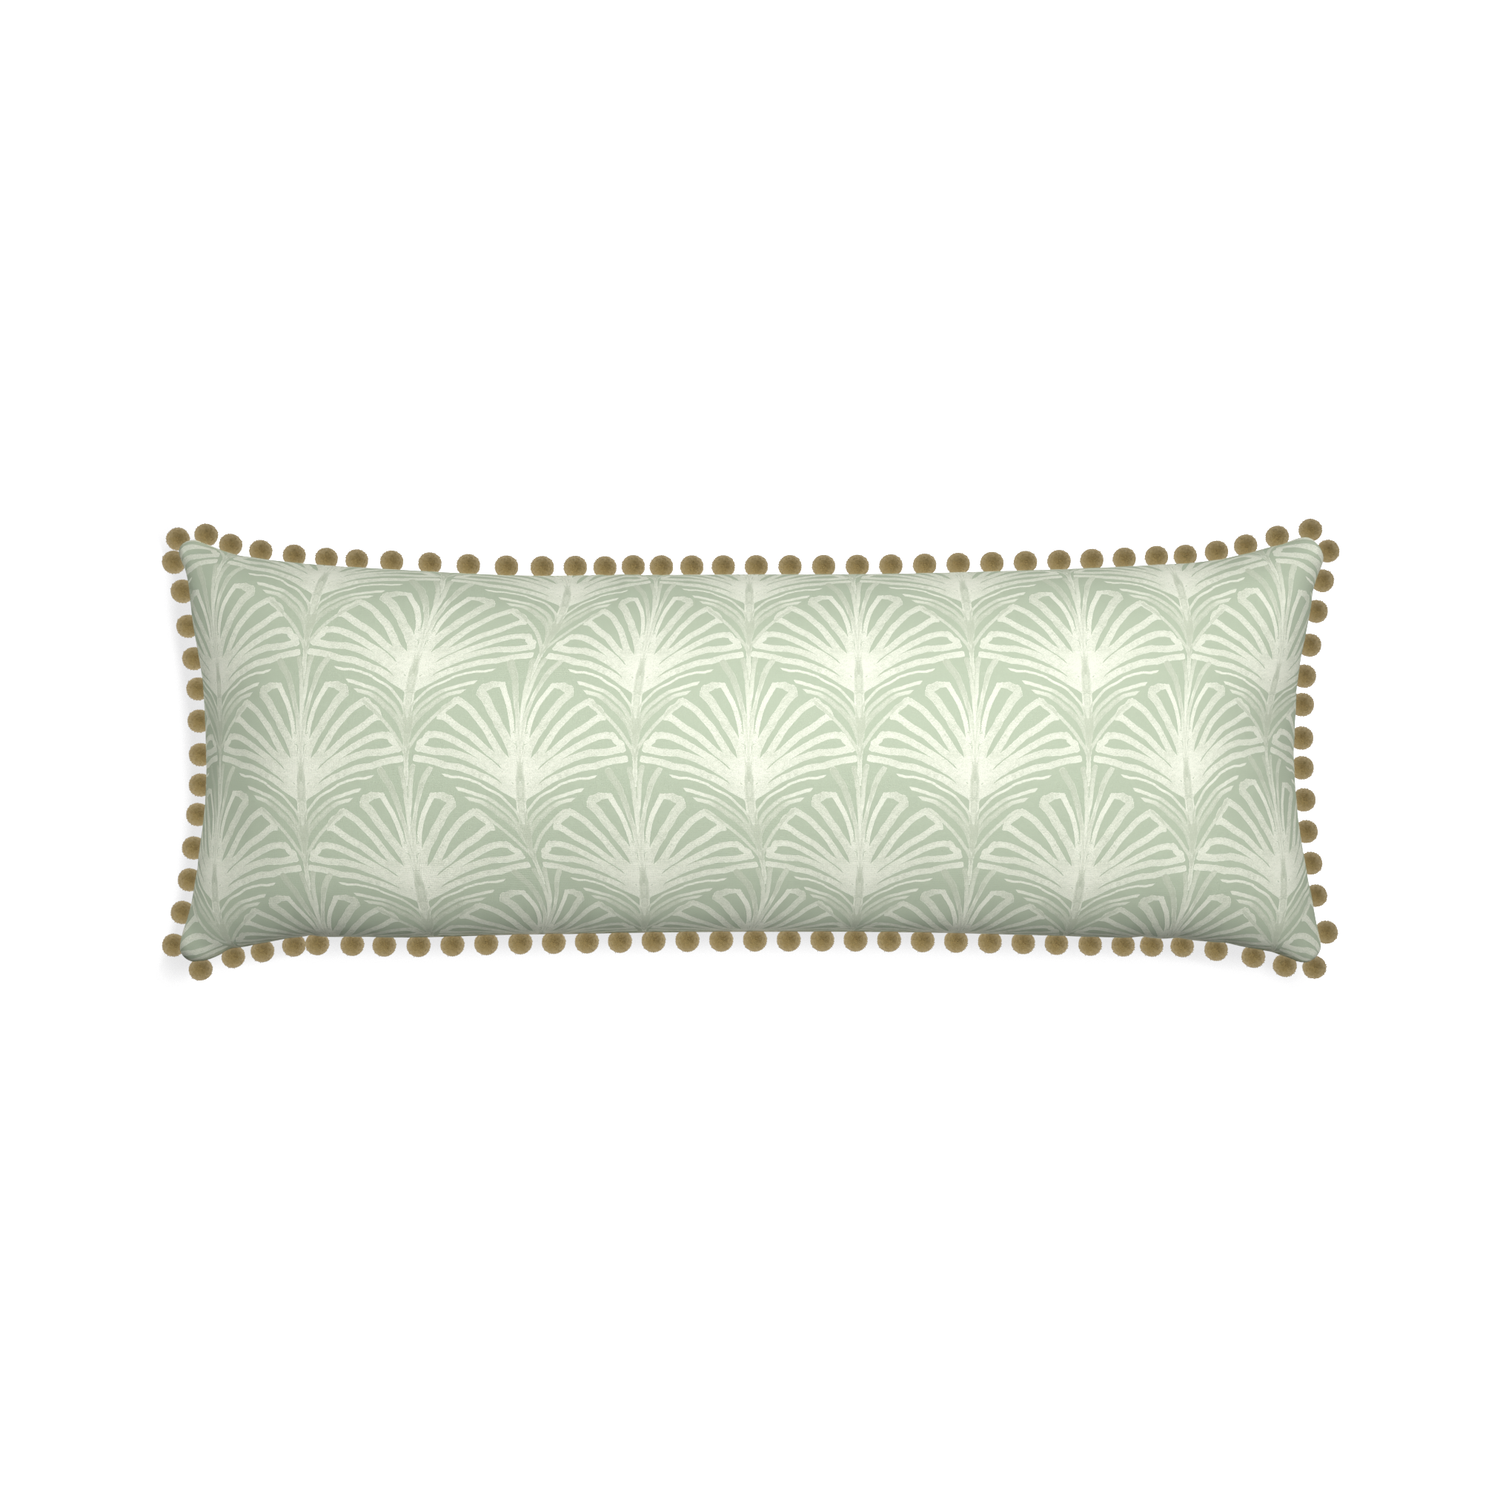 Xl-lumbar suzy sage custom sage green palmpillow with olive pom pom on white background